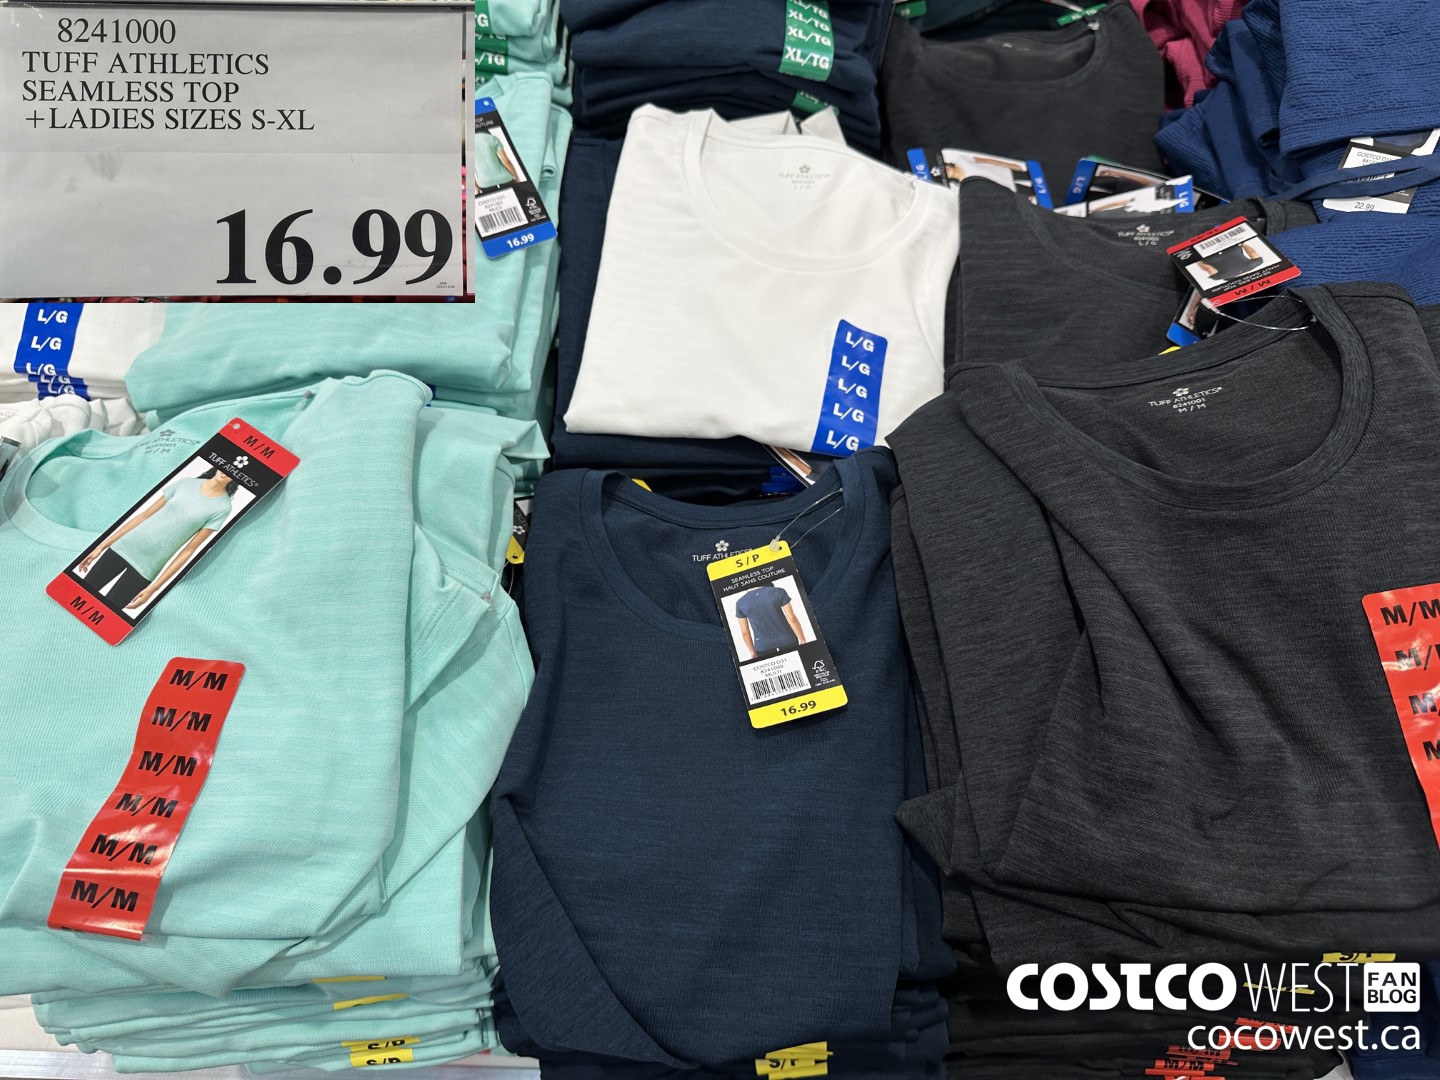 Costco Winter 2023 Superpost – The Entire Clothing Section! - Costco West Fan  Blog